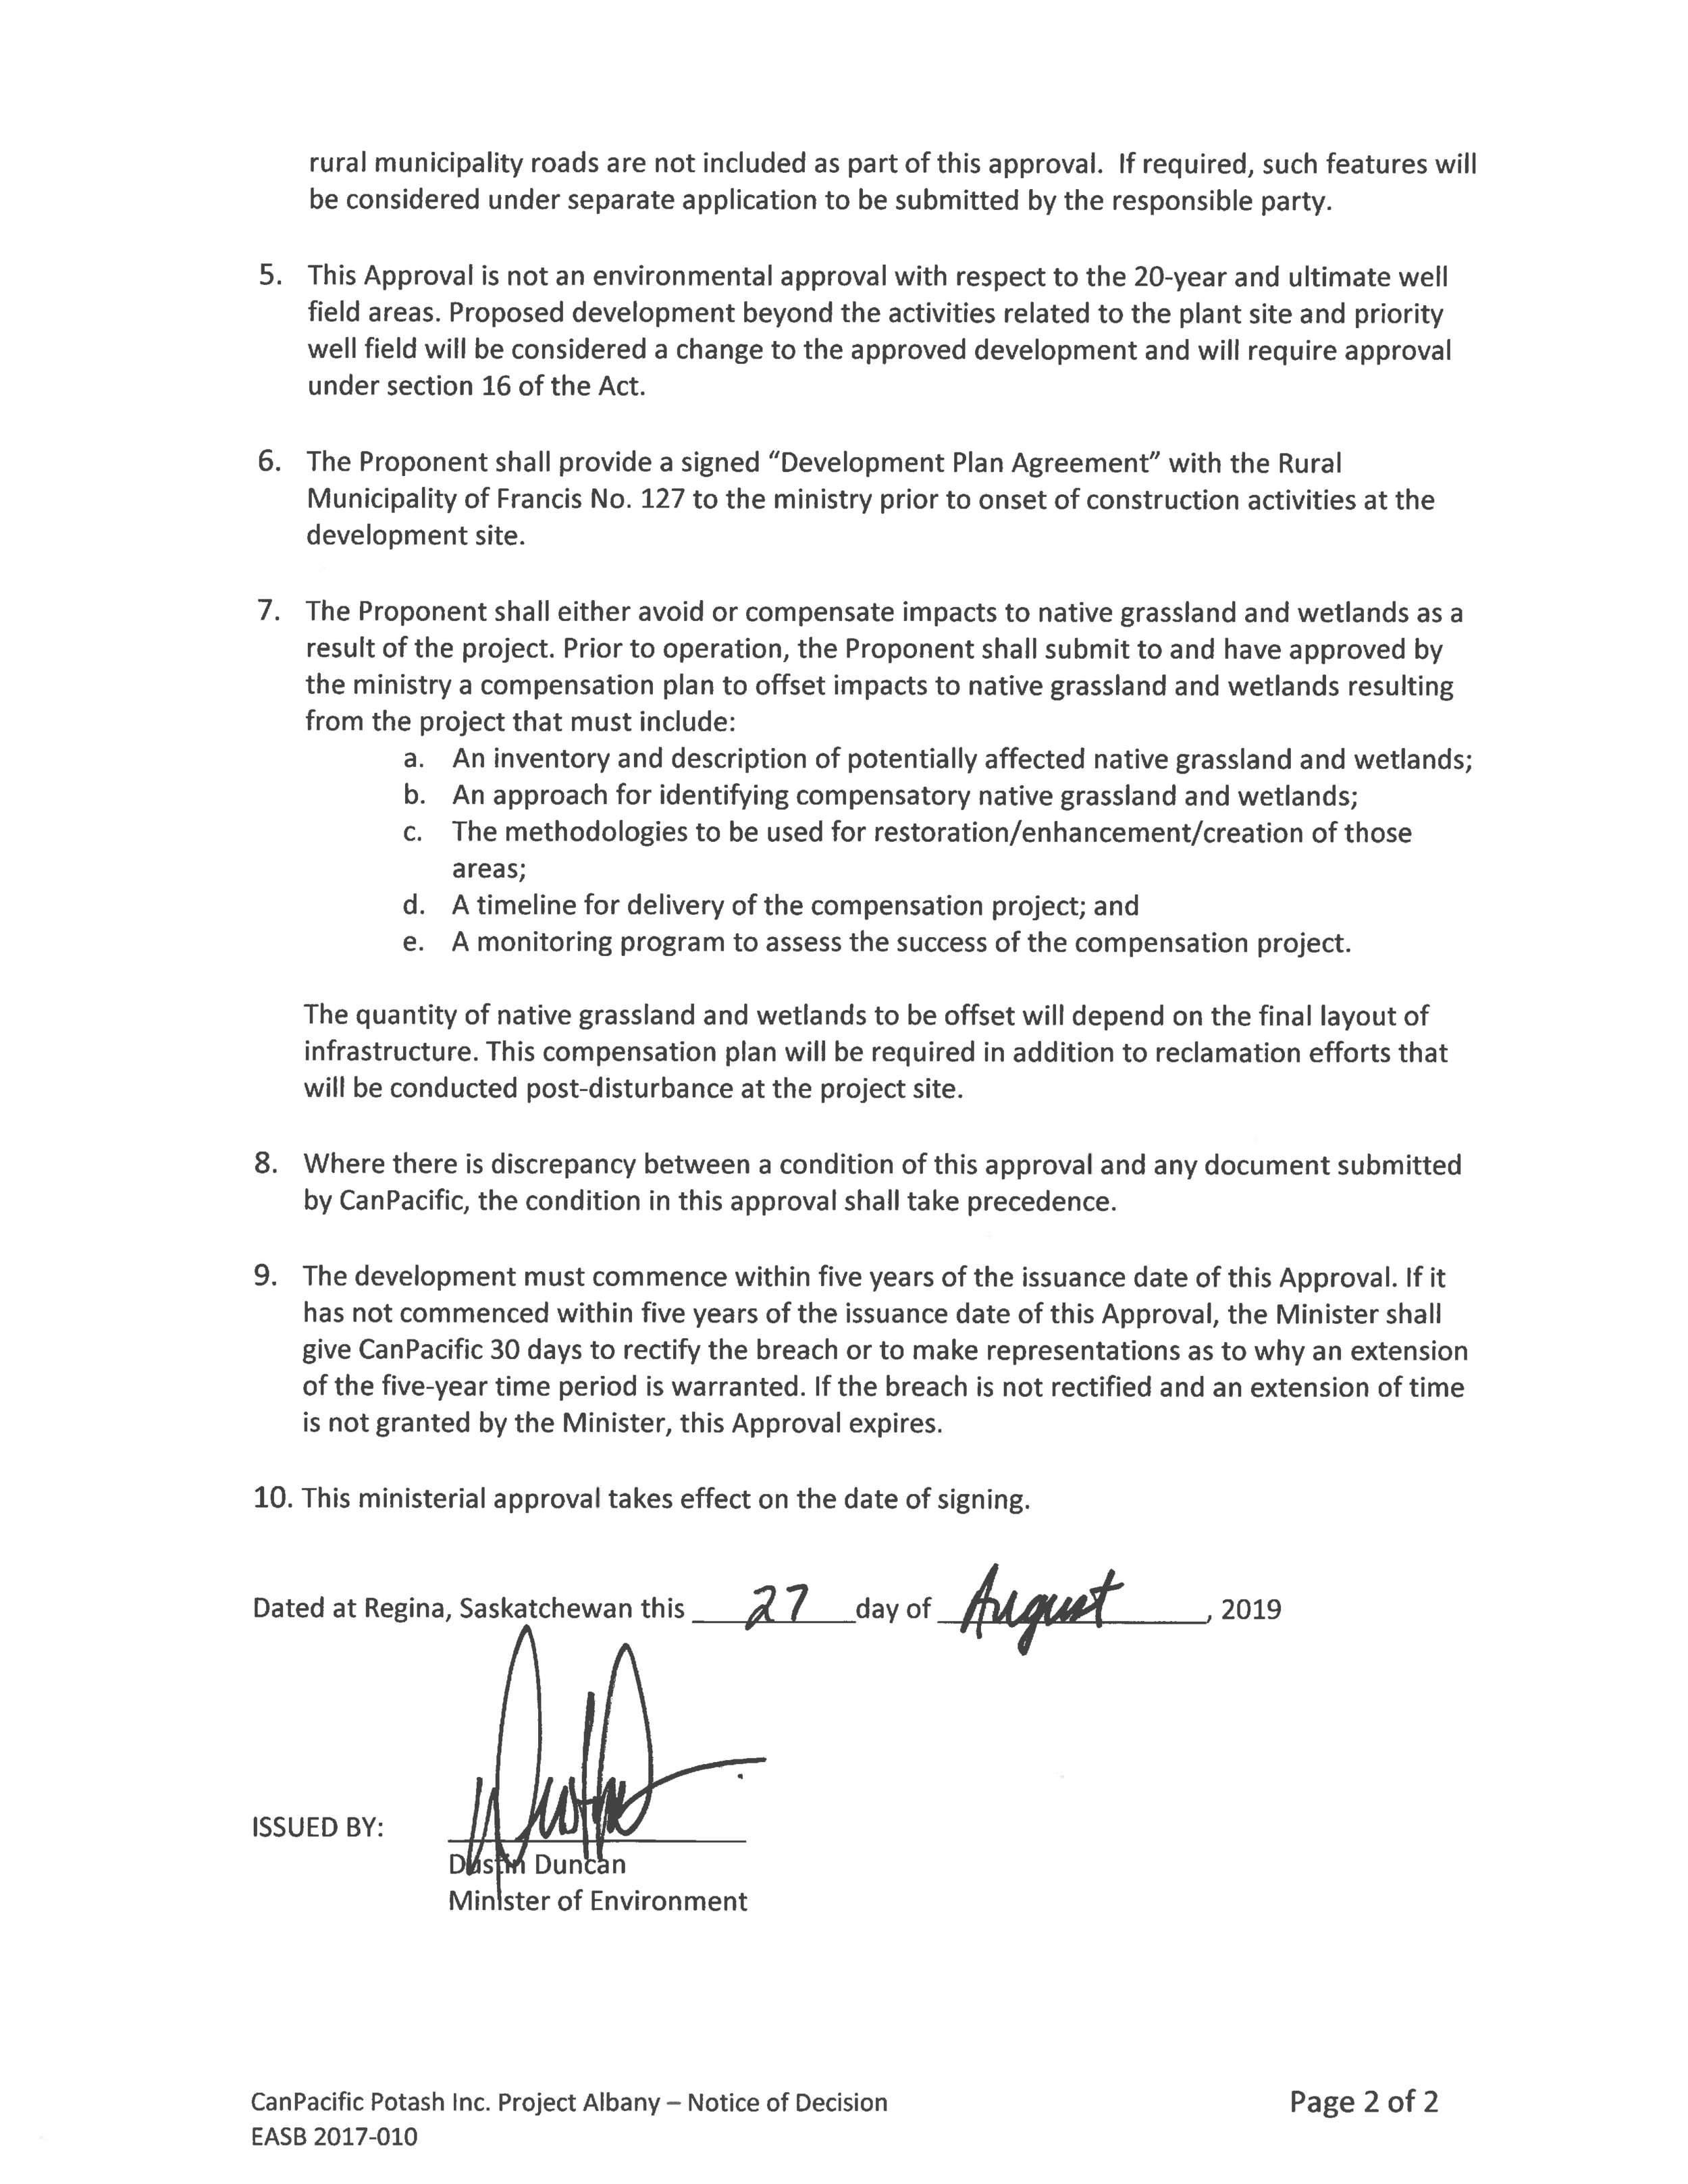 2017-010 Albany Project Decision_Signed (2)_Page_02.png